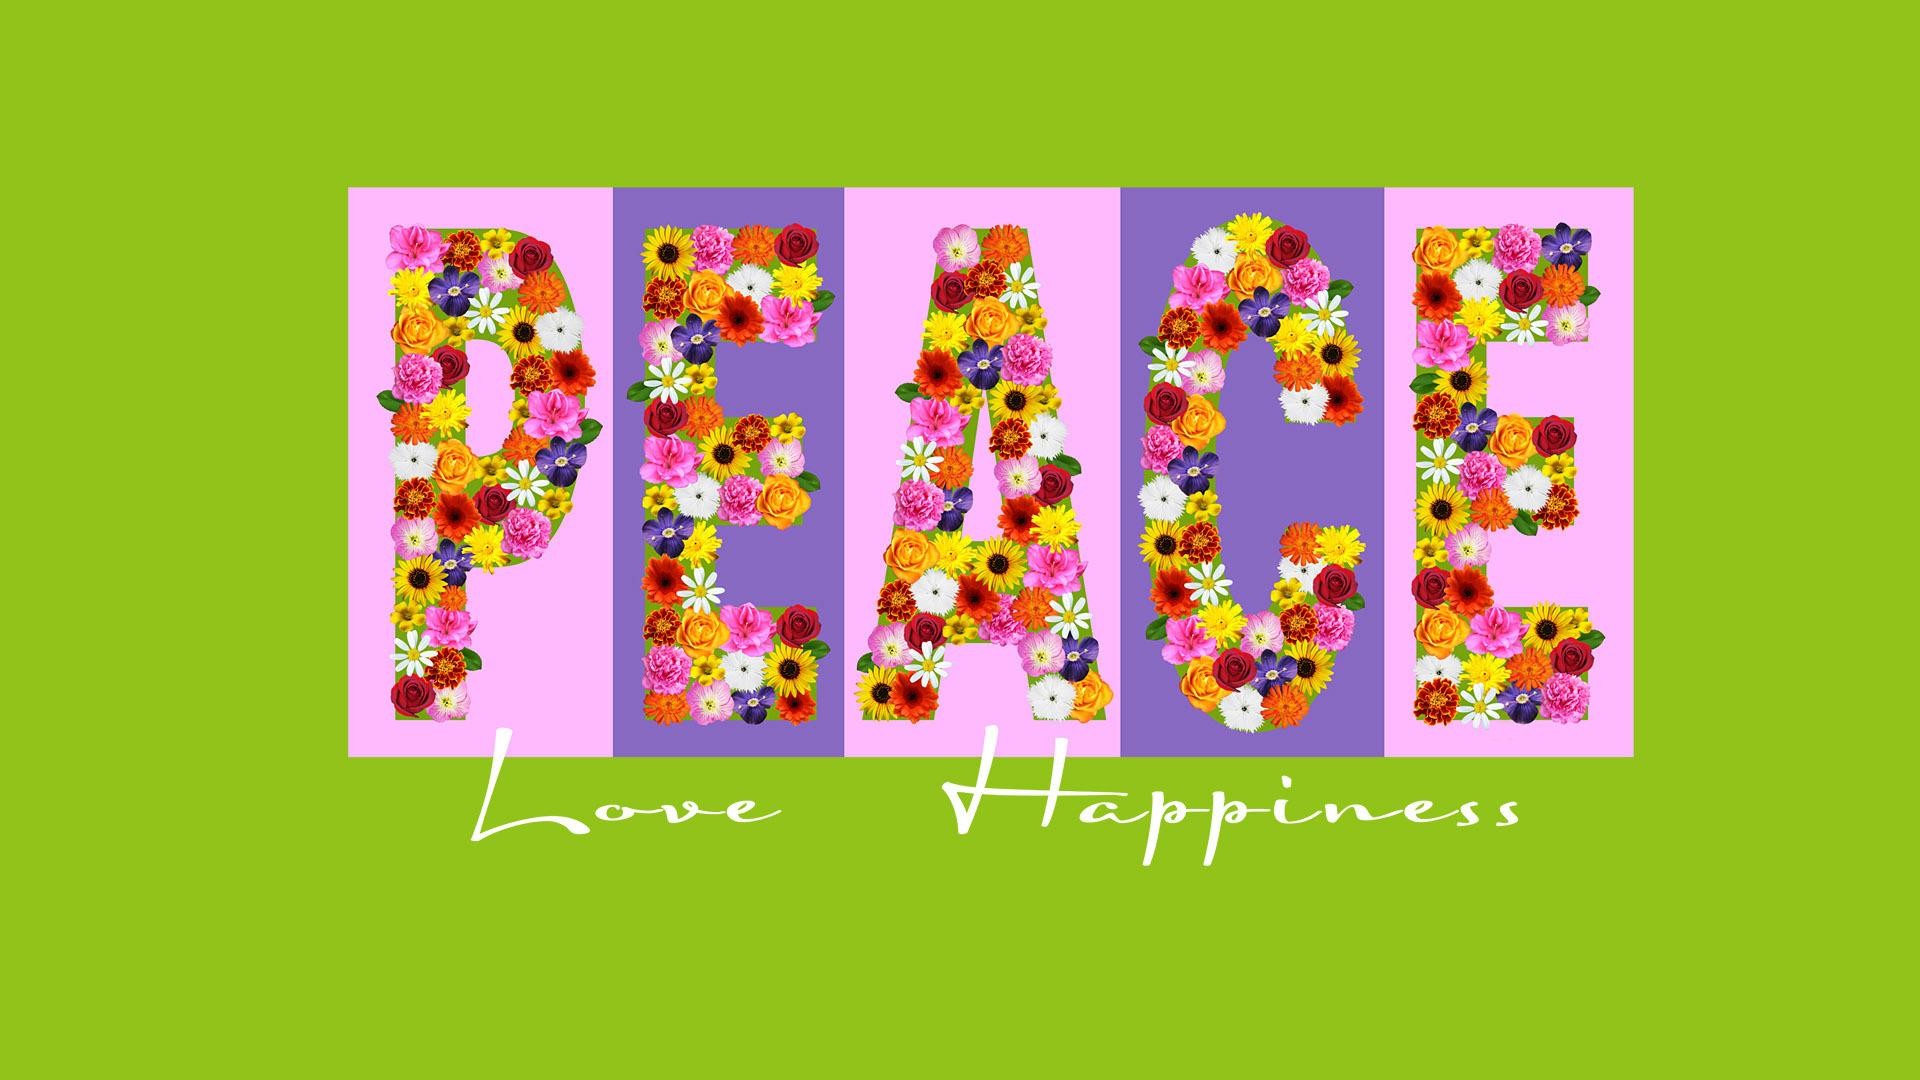 1920x1080 Peace, love and happiness